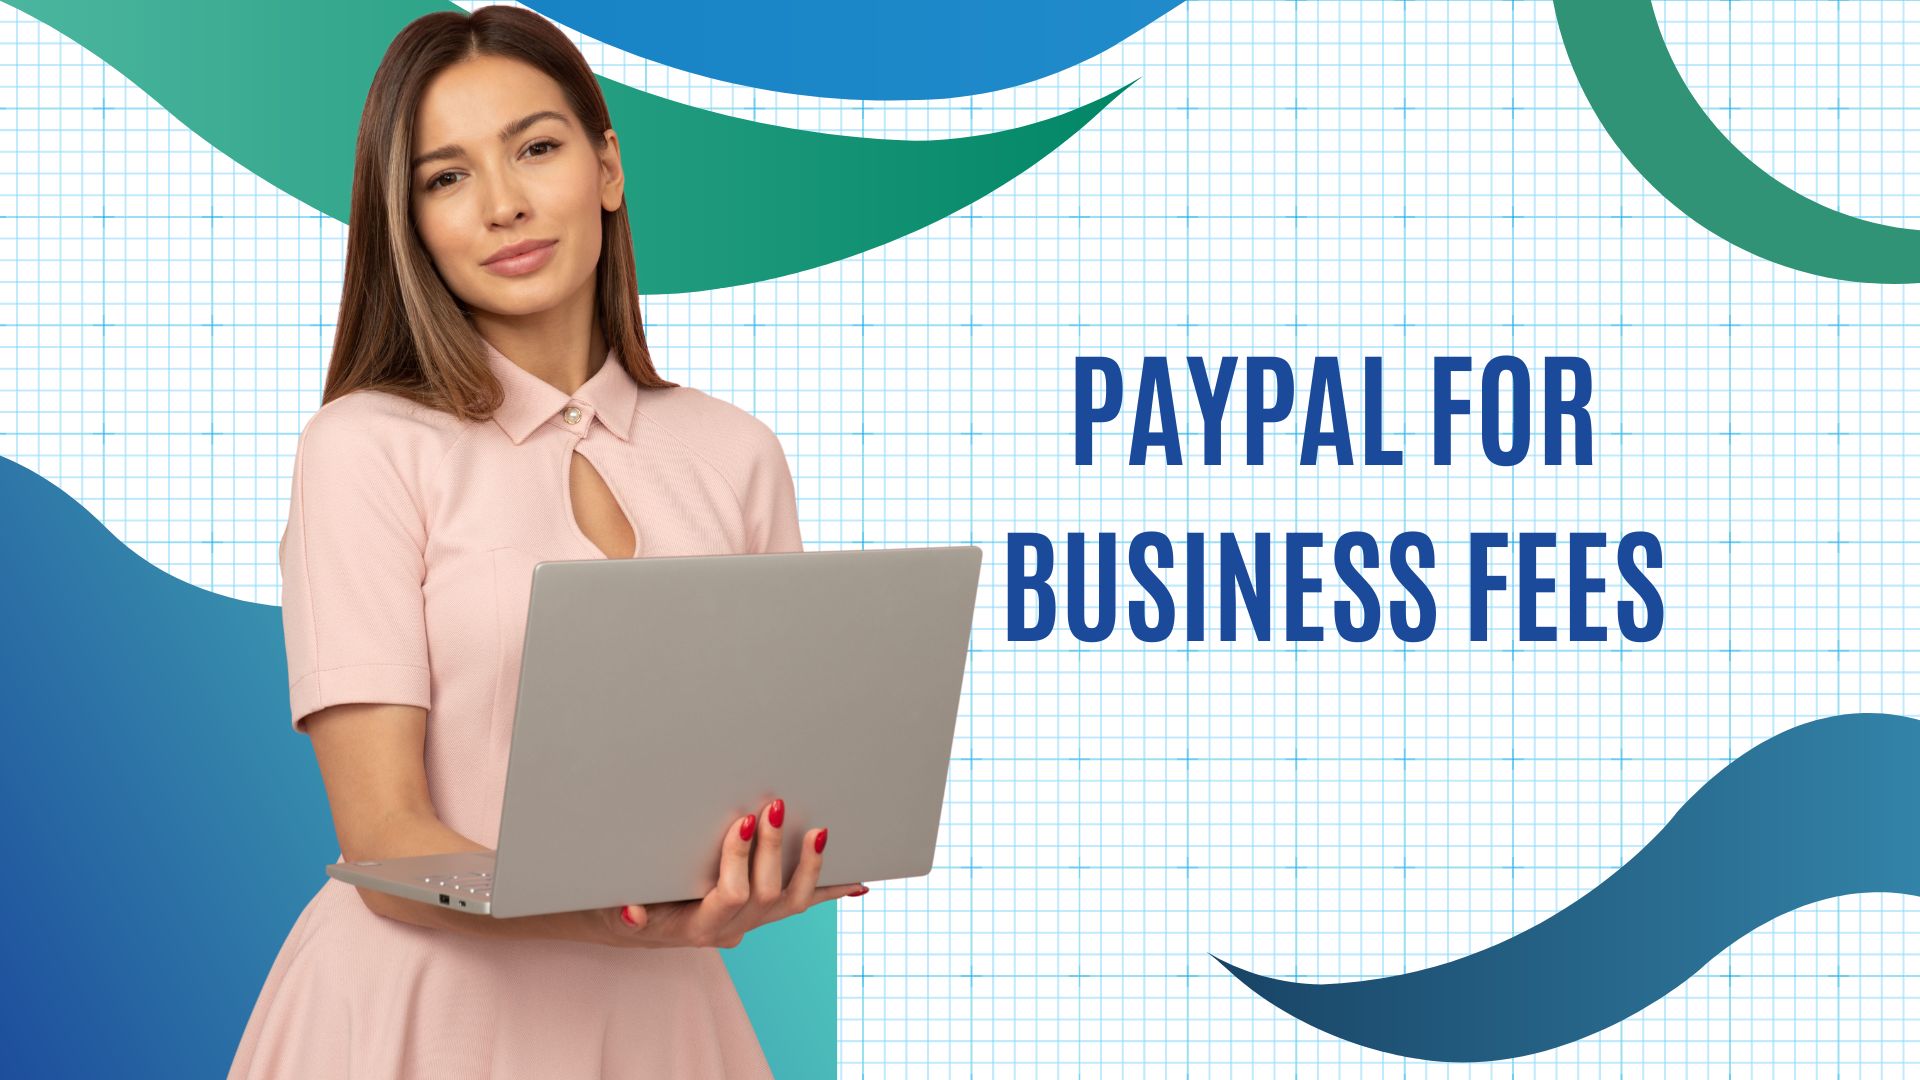 Paypal for Business Fees